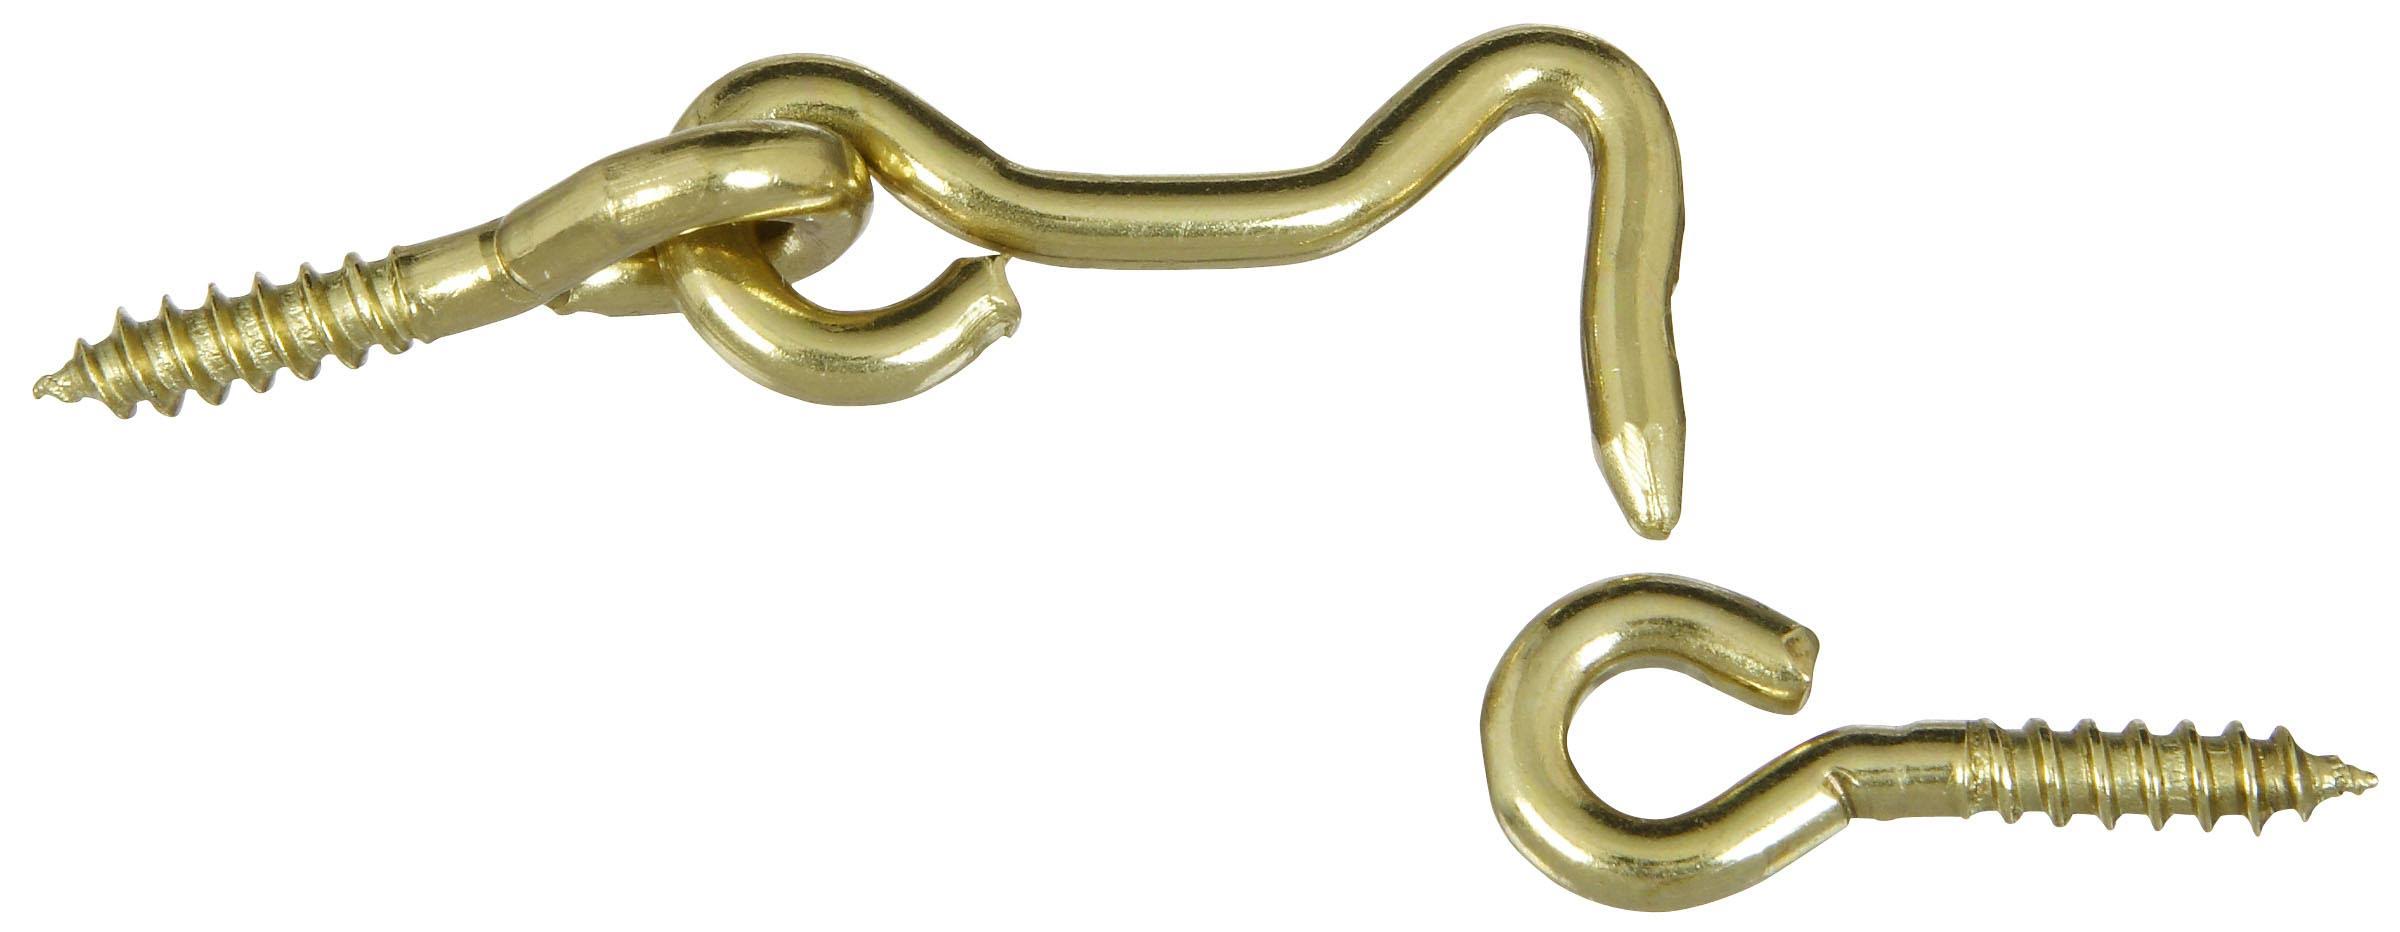 National Hardware Hook and Eye - Solid Brass, 1 1/2"